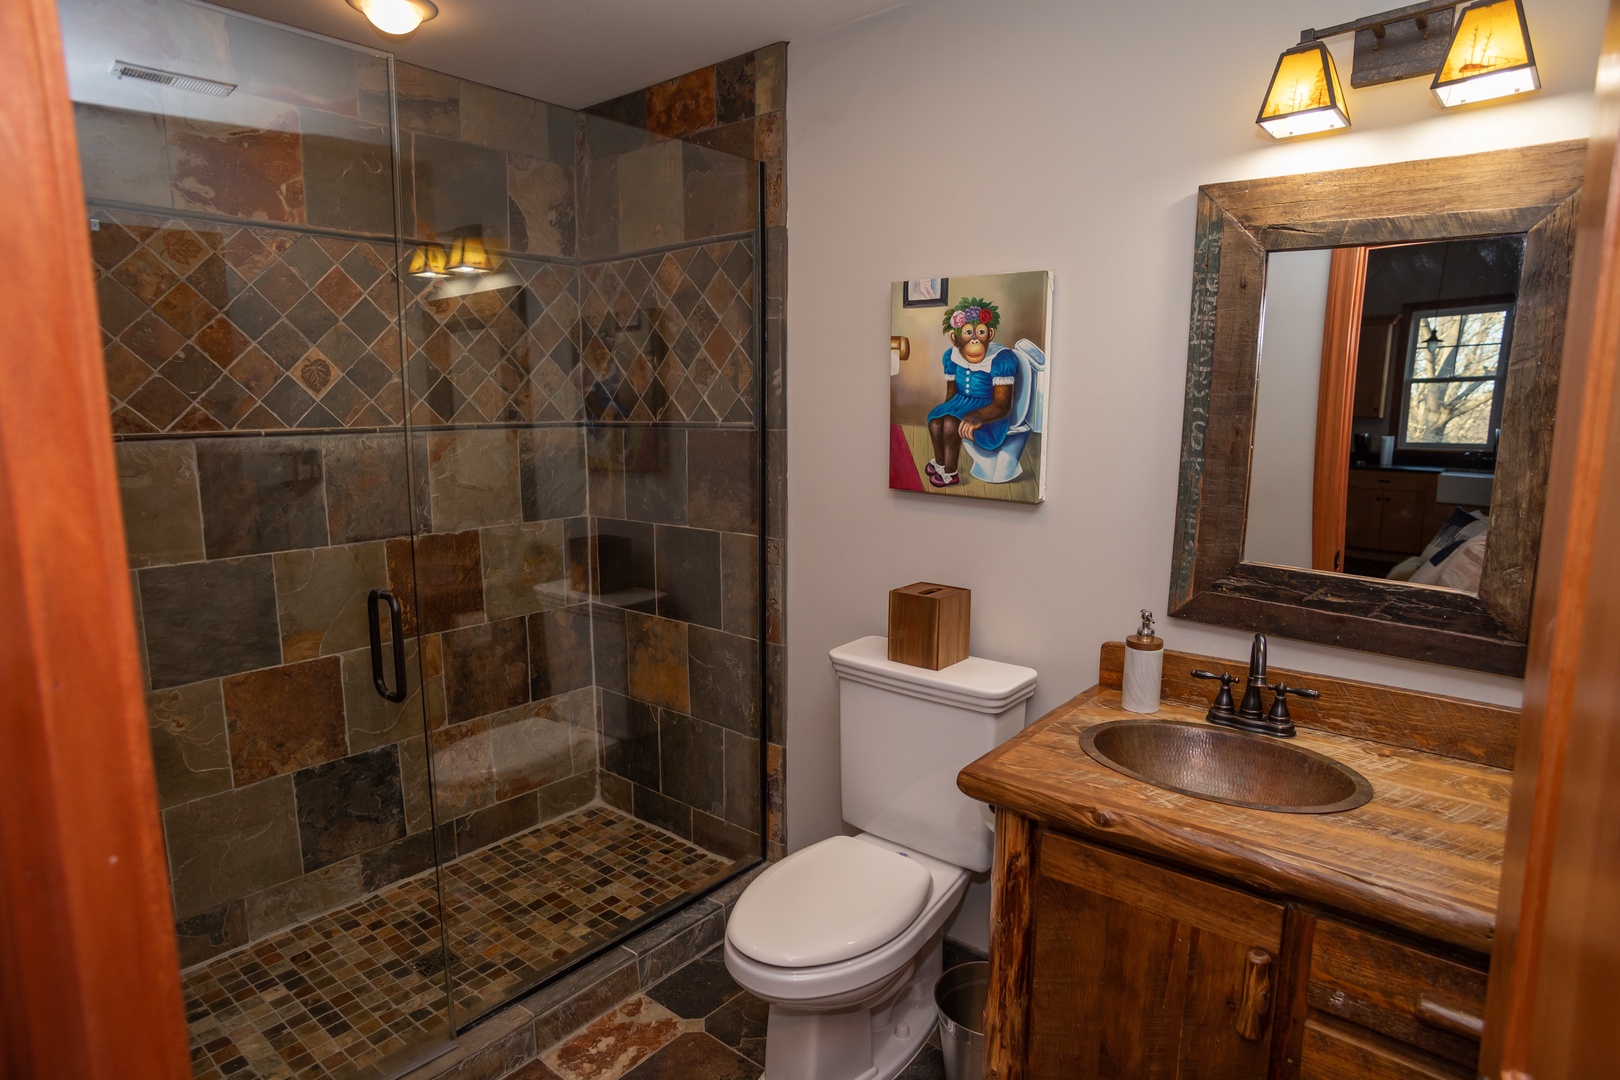 Large, walk-in showers give adult guests room to fully unwind.